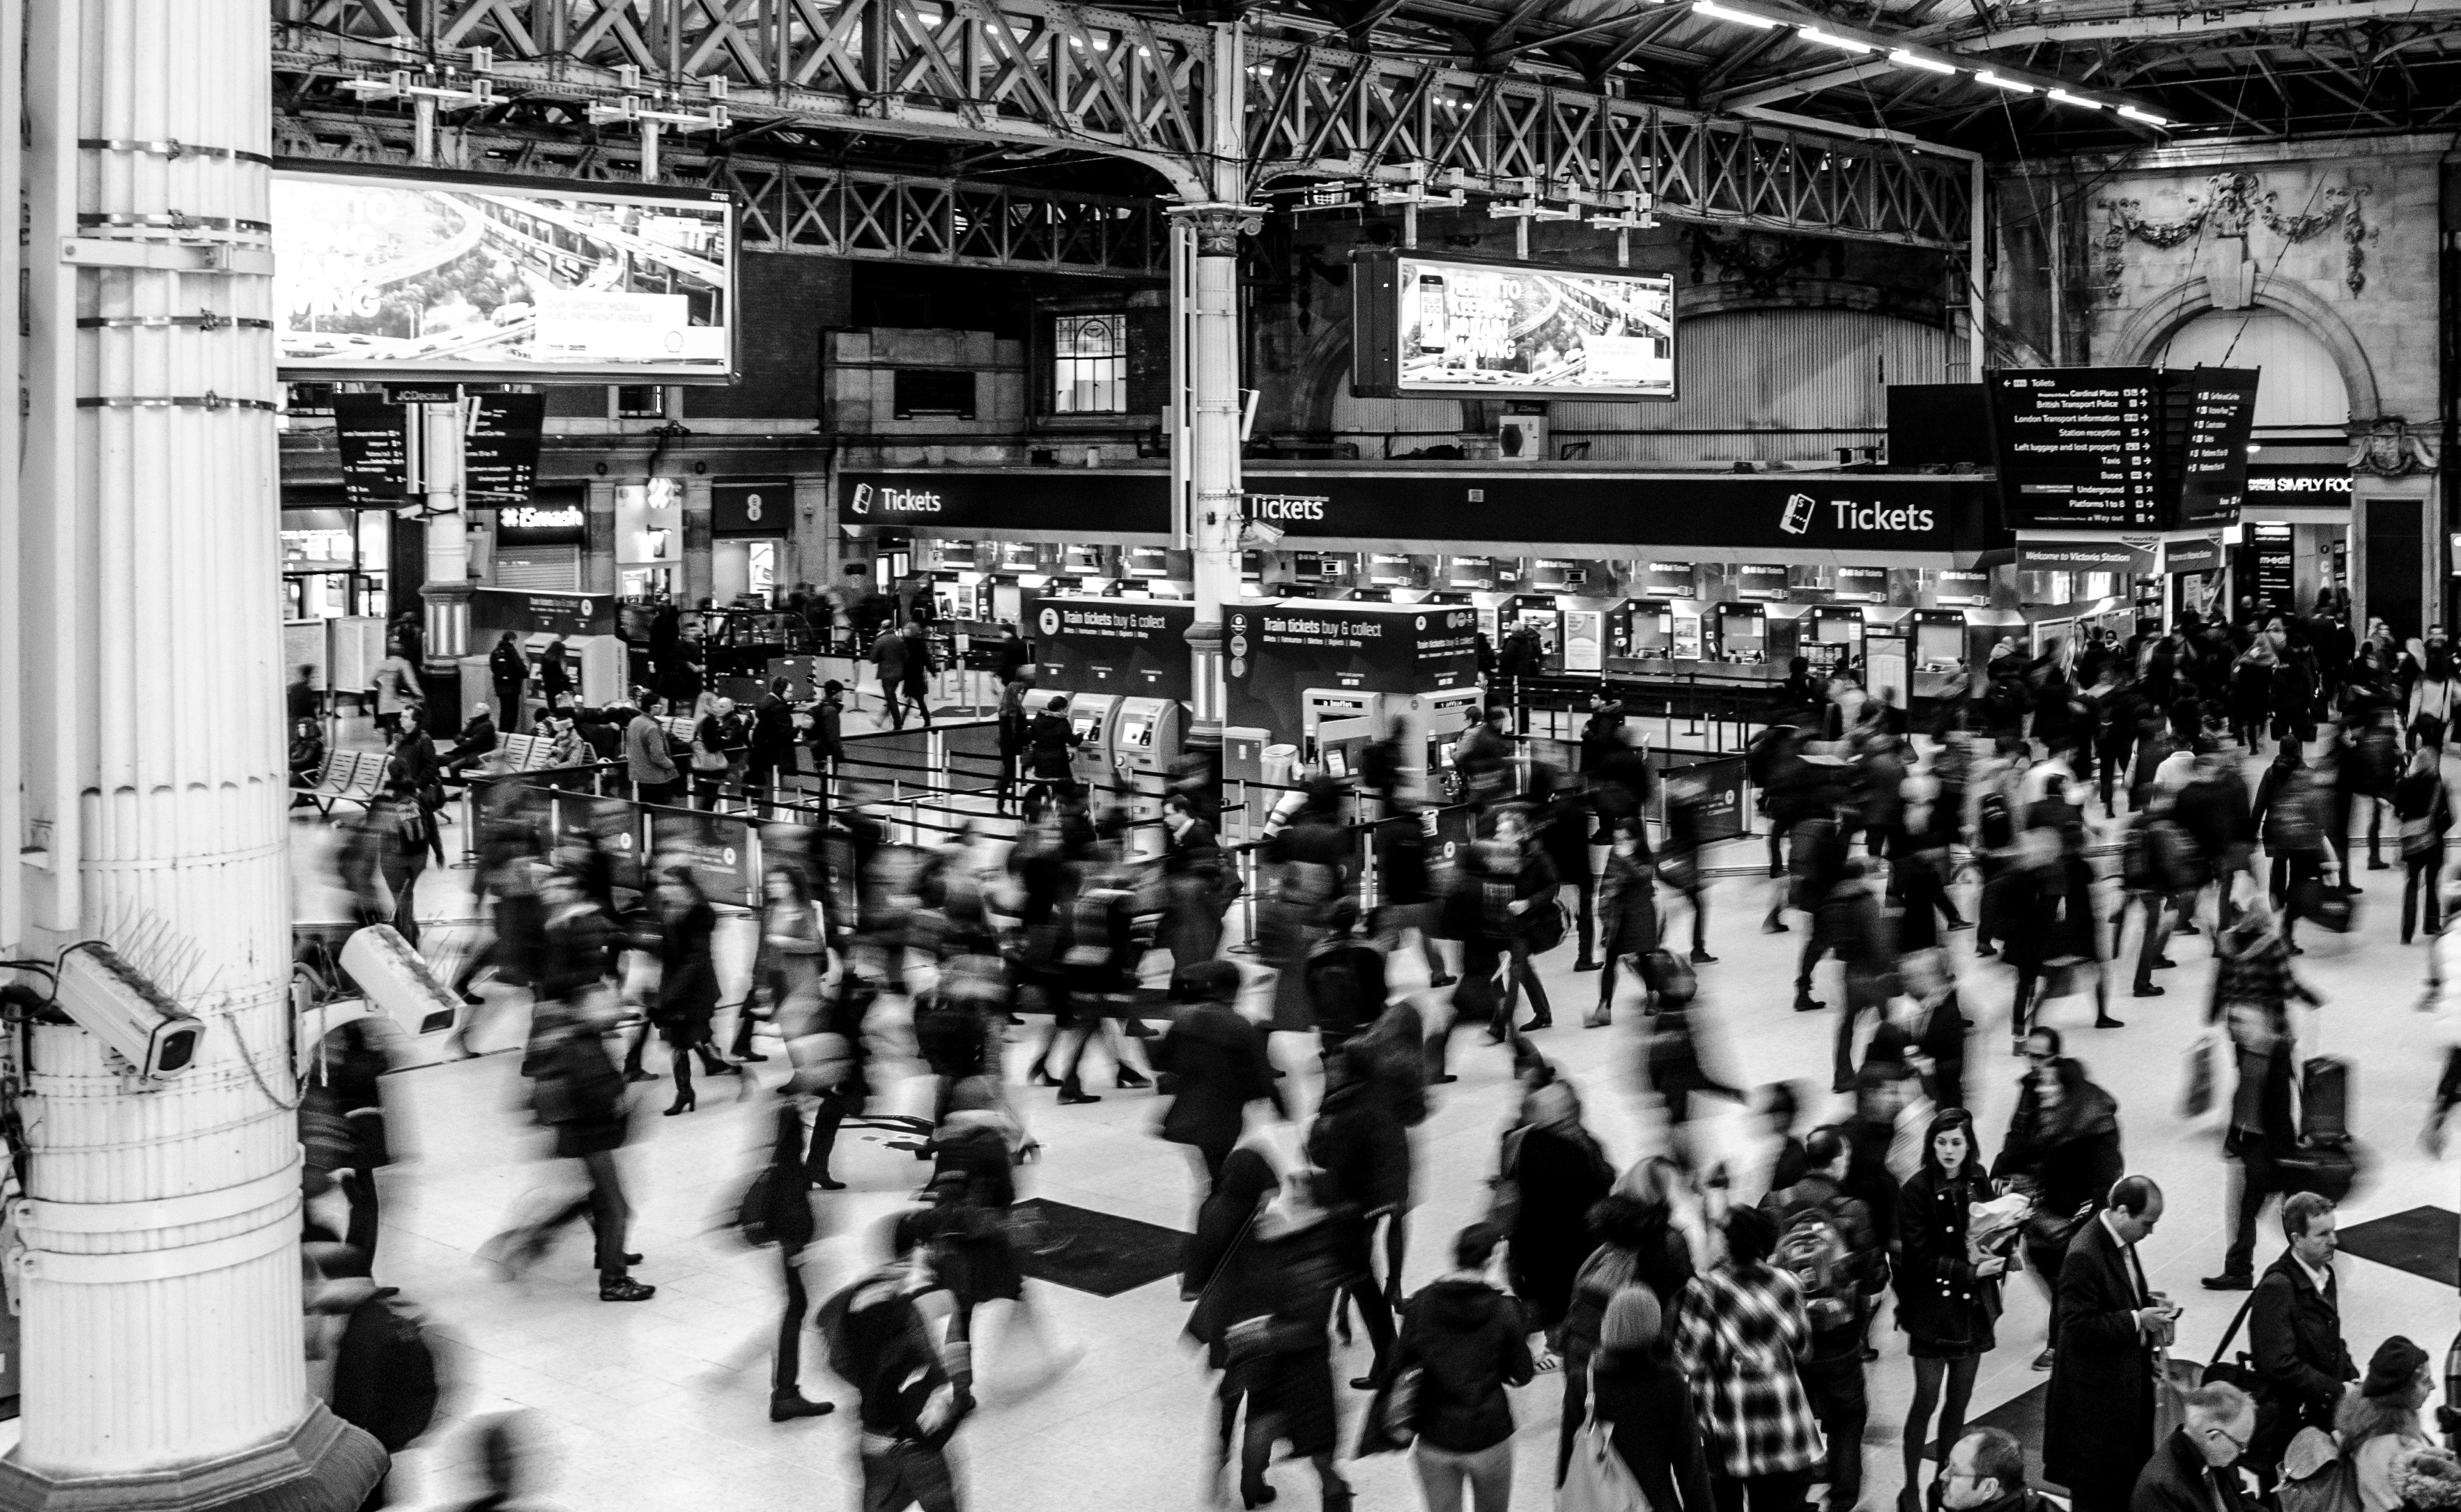 Black and white, blurred photograph of a crowd in a large train station